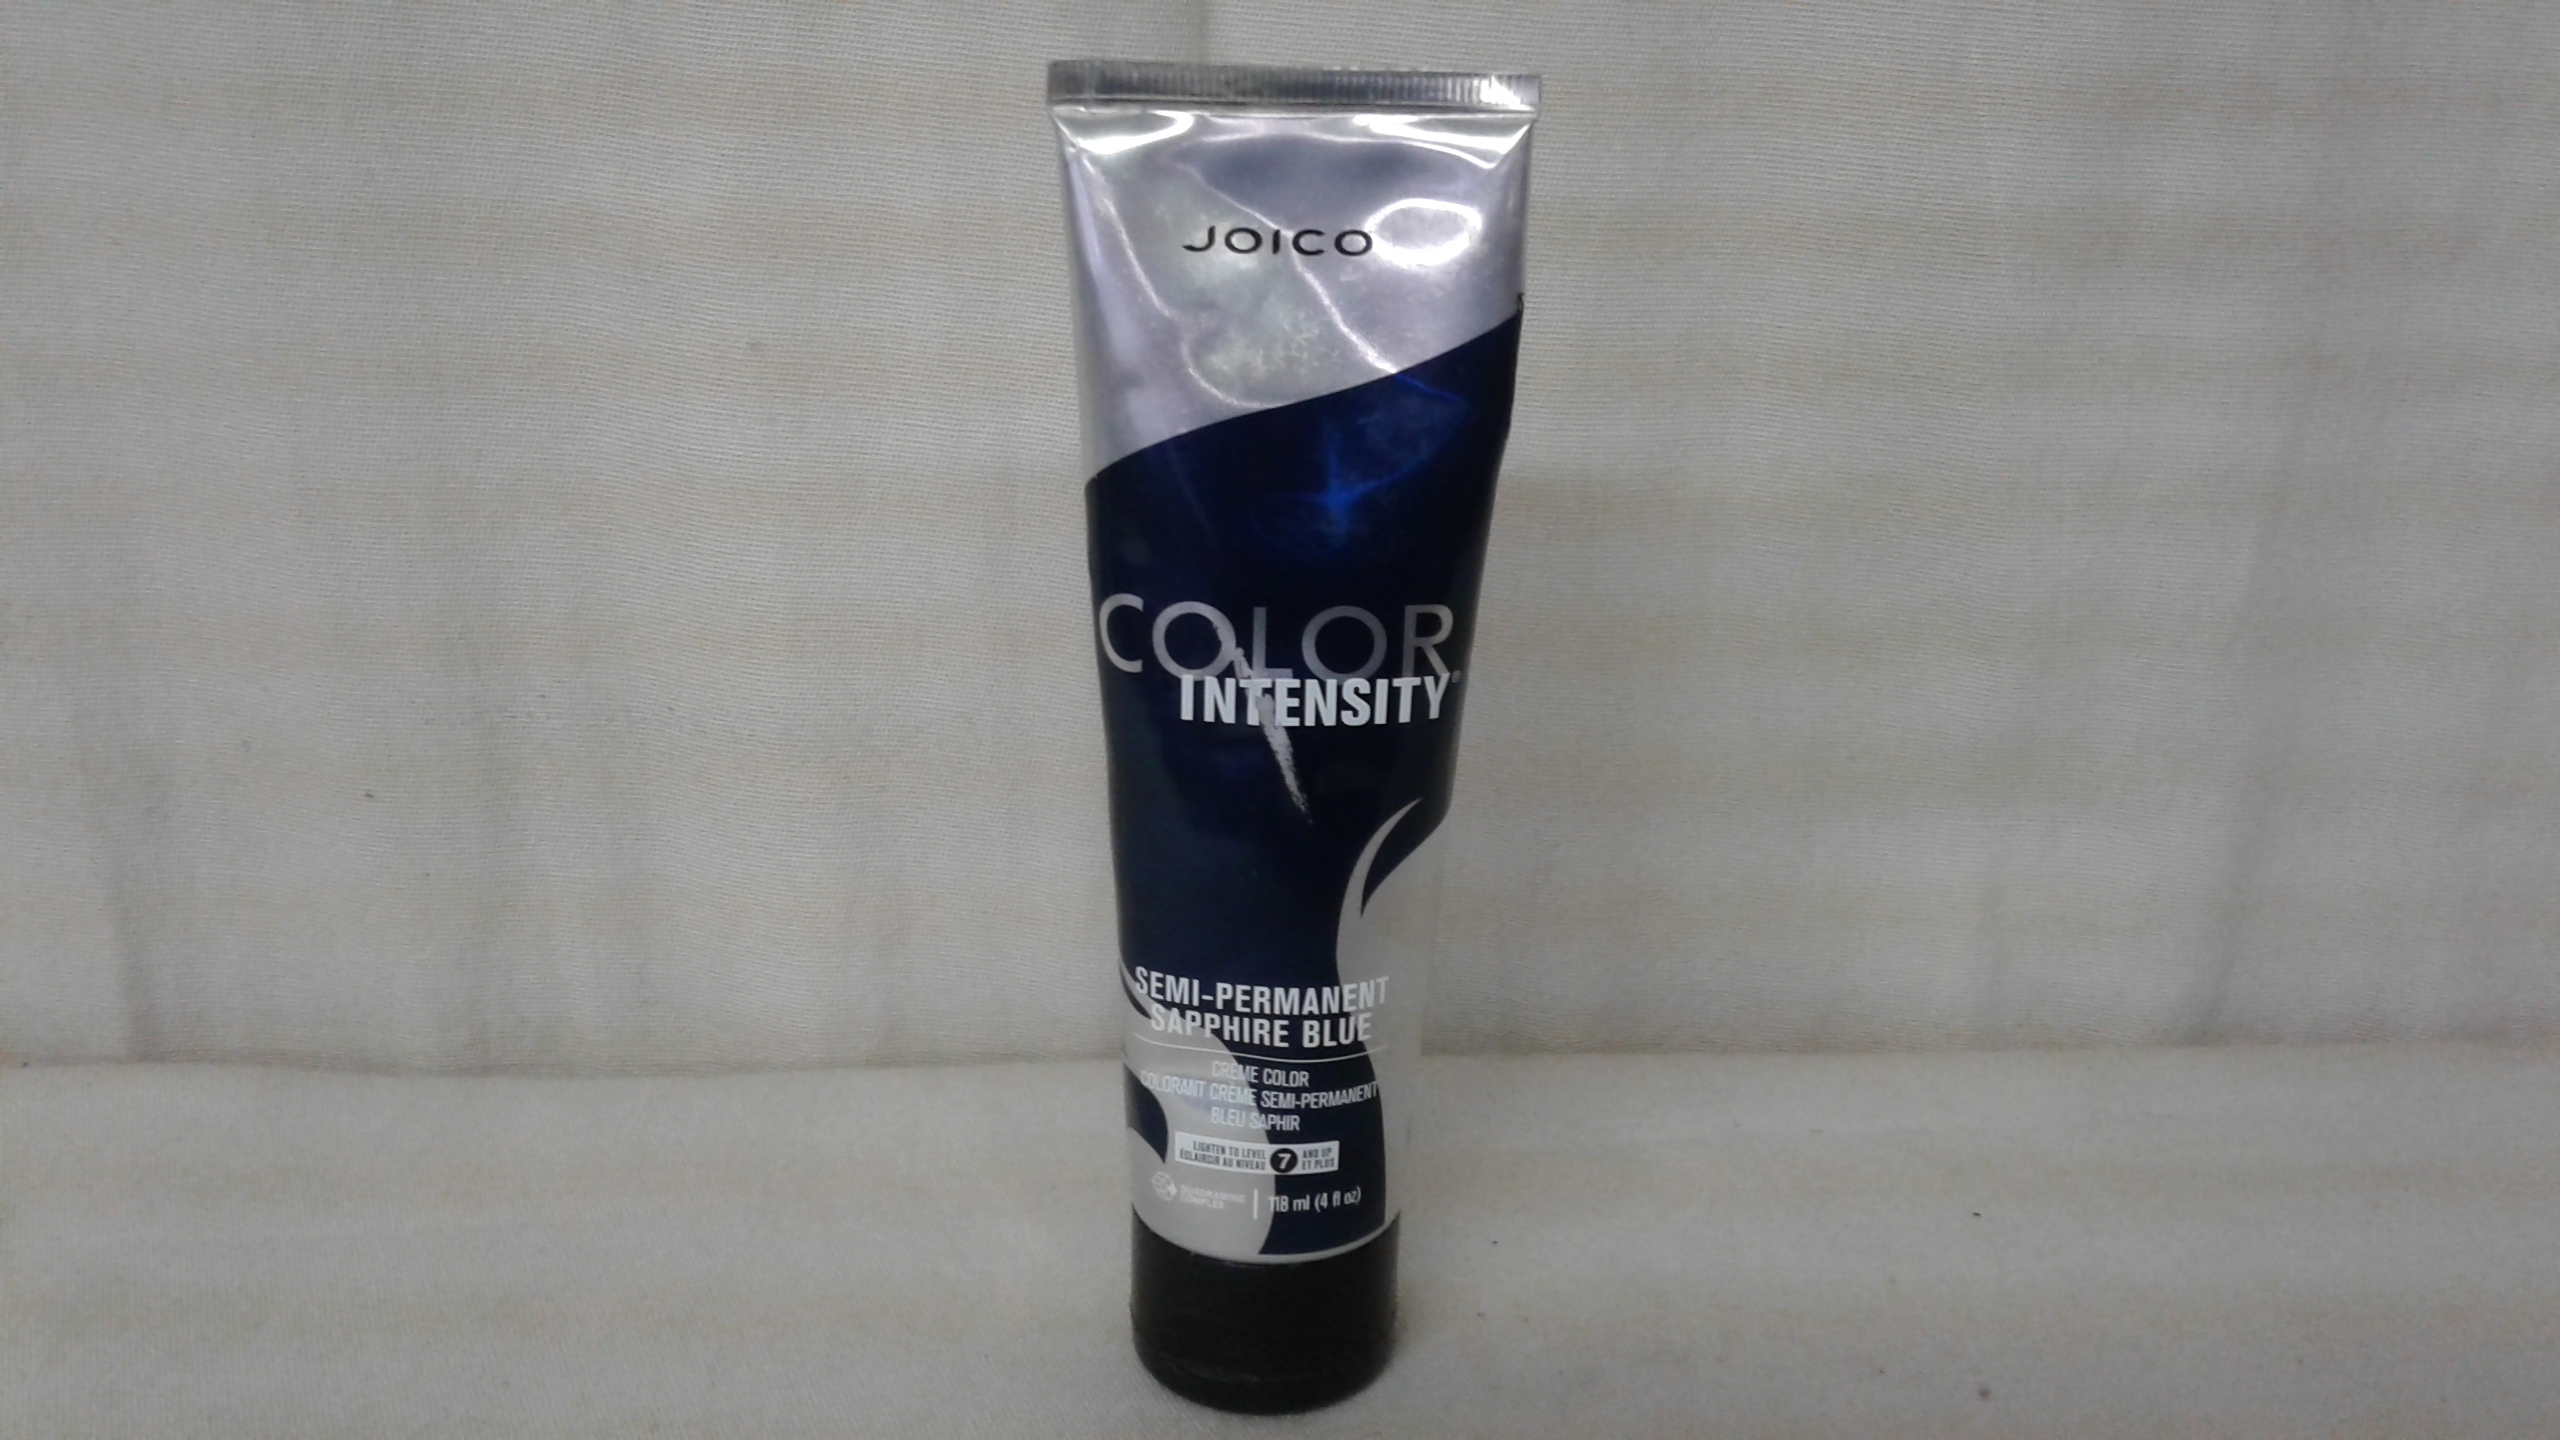 4. Joico Color Intensity Semi-Permanent Hair Color in Sapphire Blue - wide 3